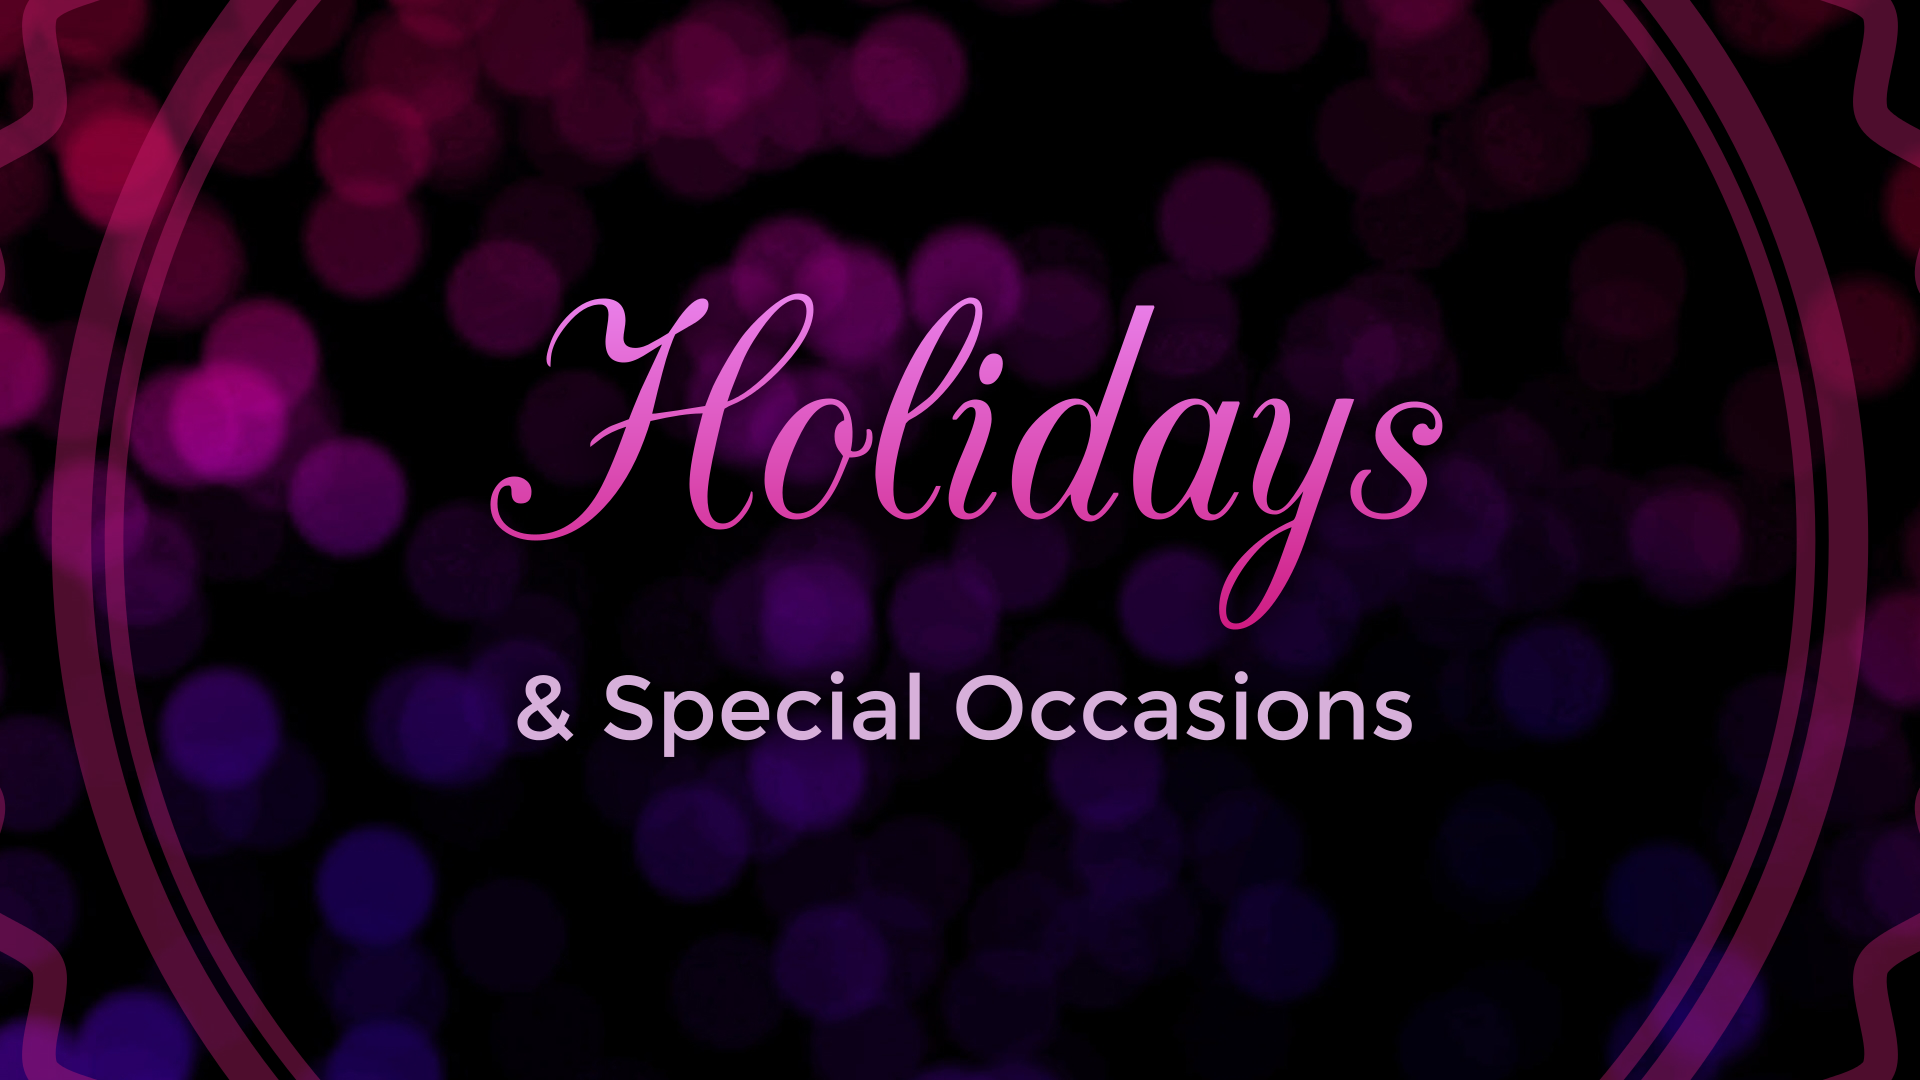 Holidays & Special Occasions banner